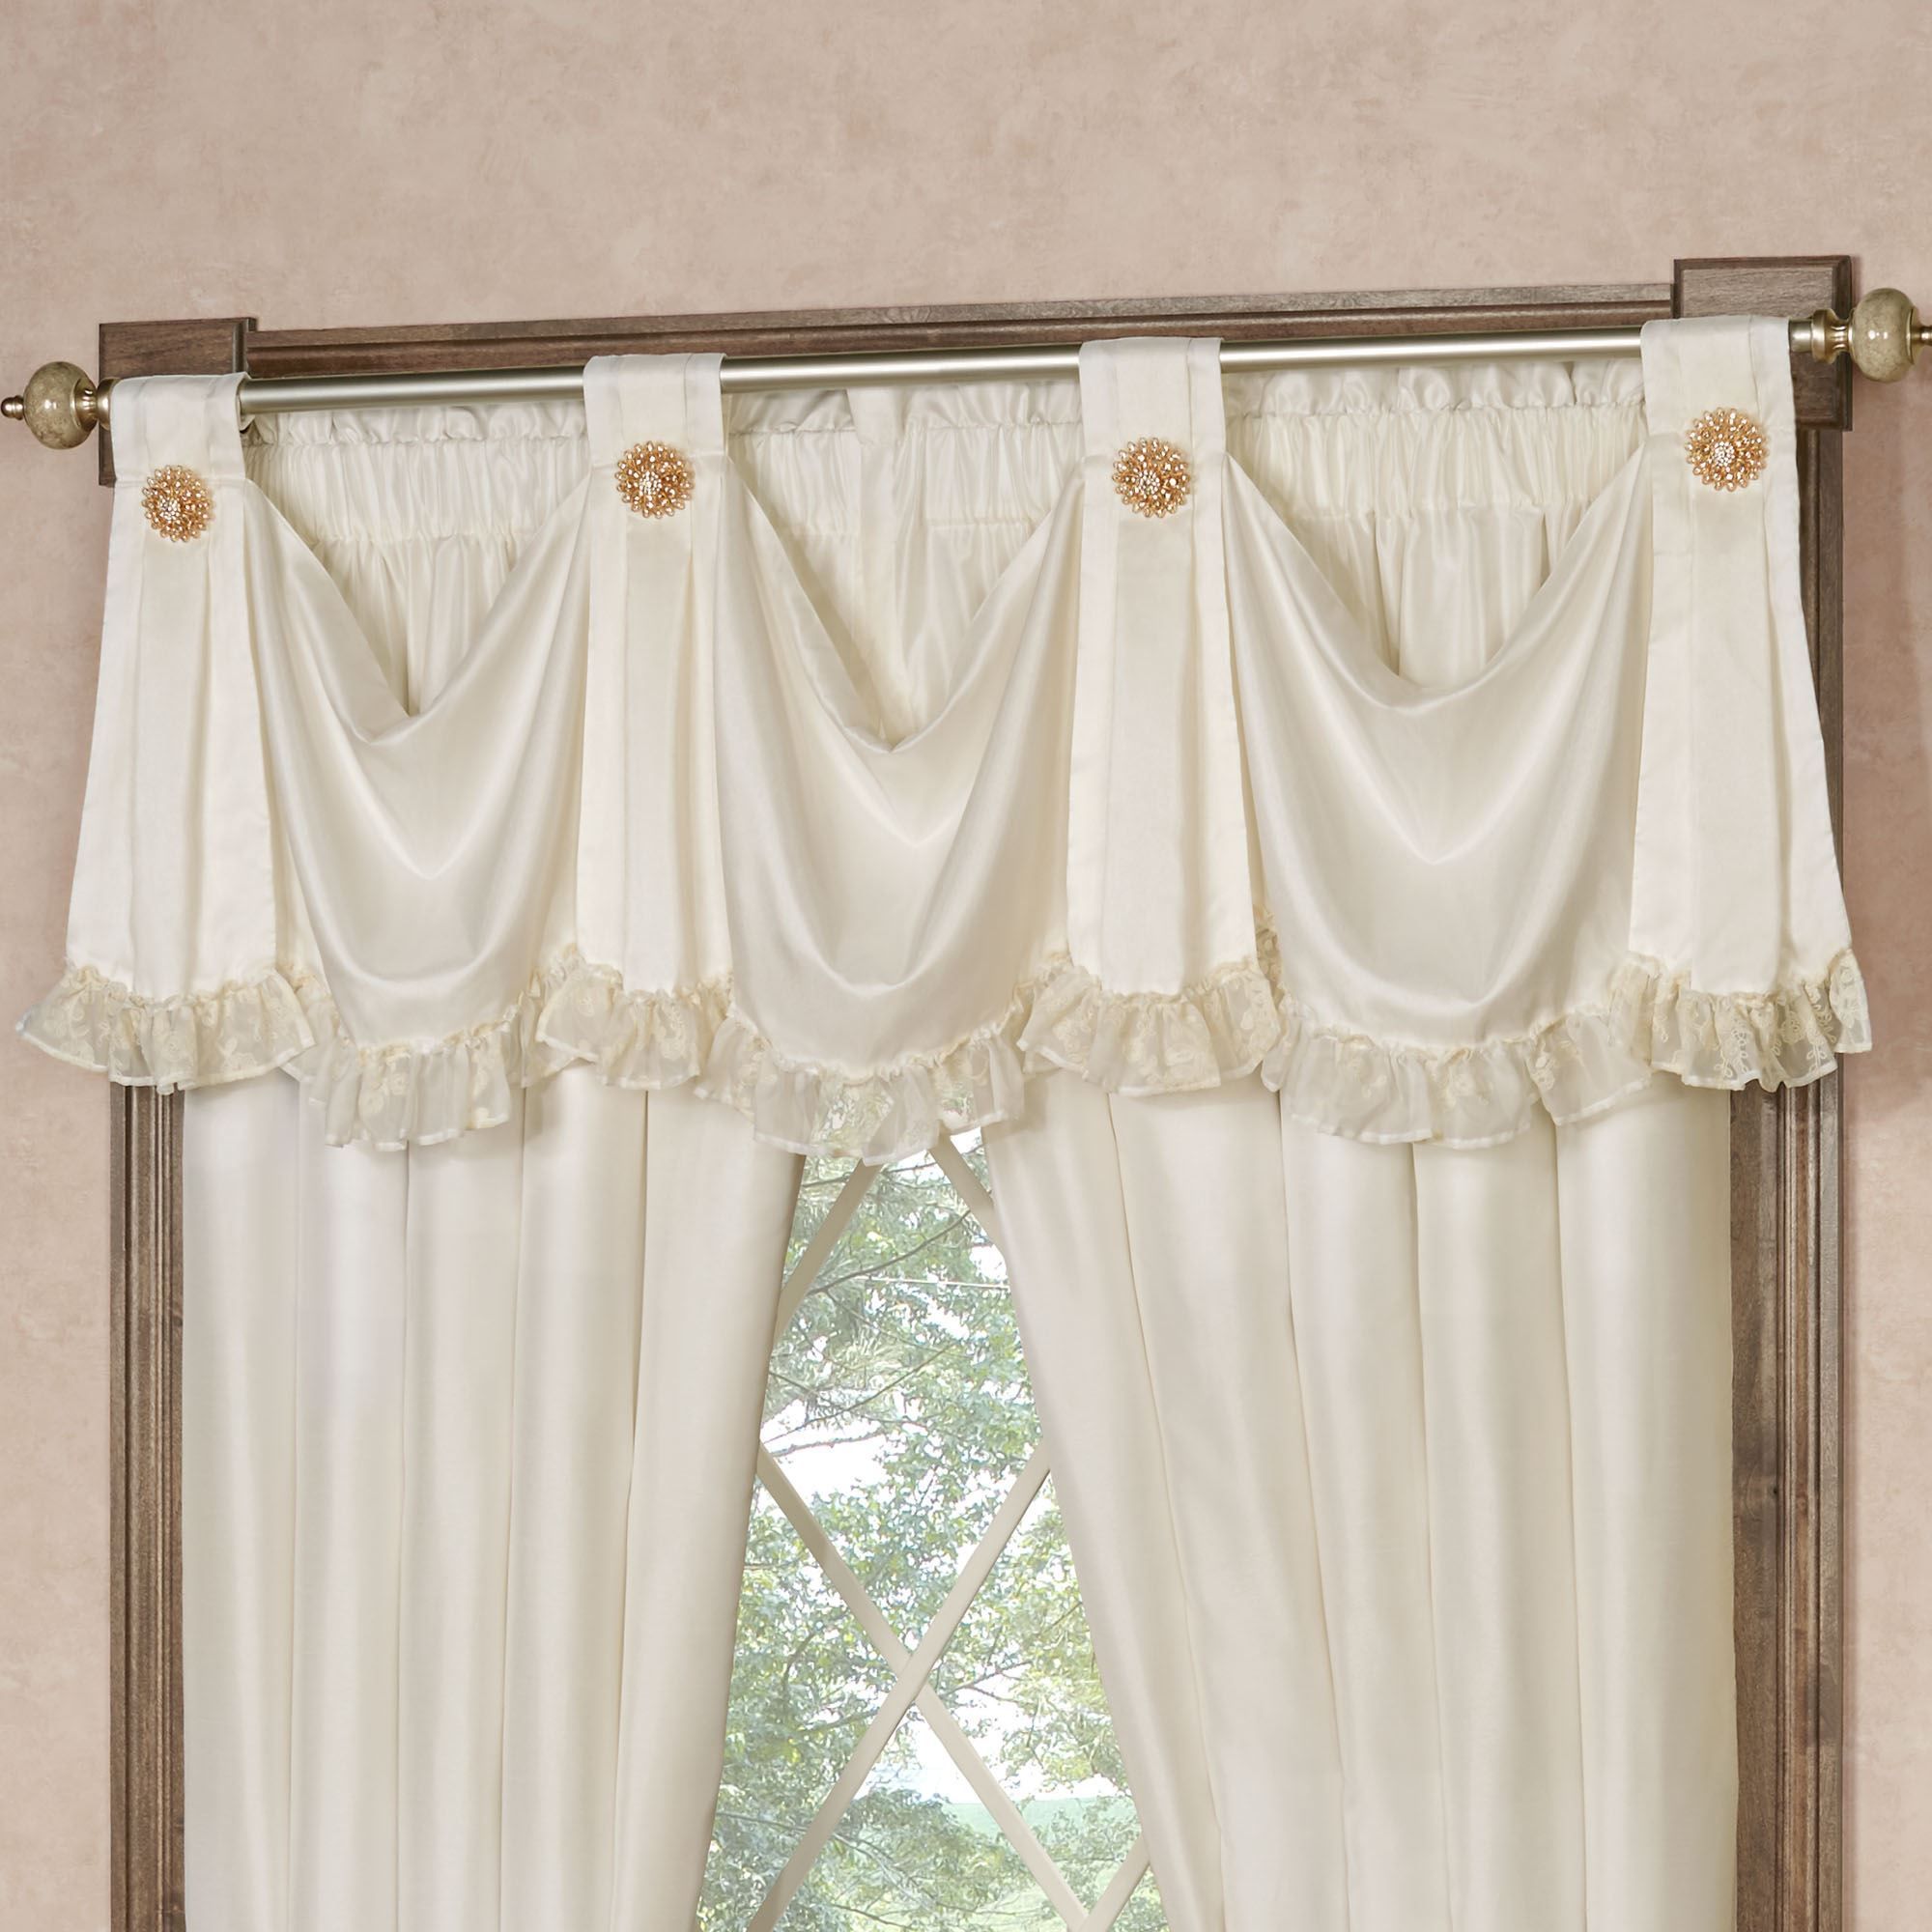 Cameo Lace Romantic Vintage Style Grande Bedspread Bedding Within Vertical Ruffled Waterfall Valances And Curtain Tiers (Photo 16 of 20)